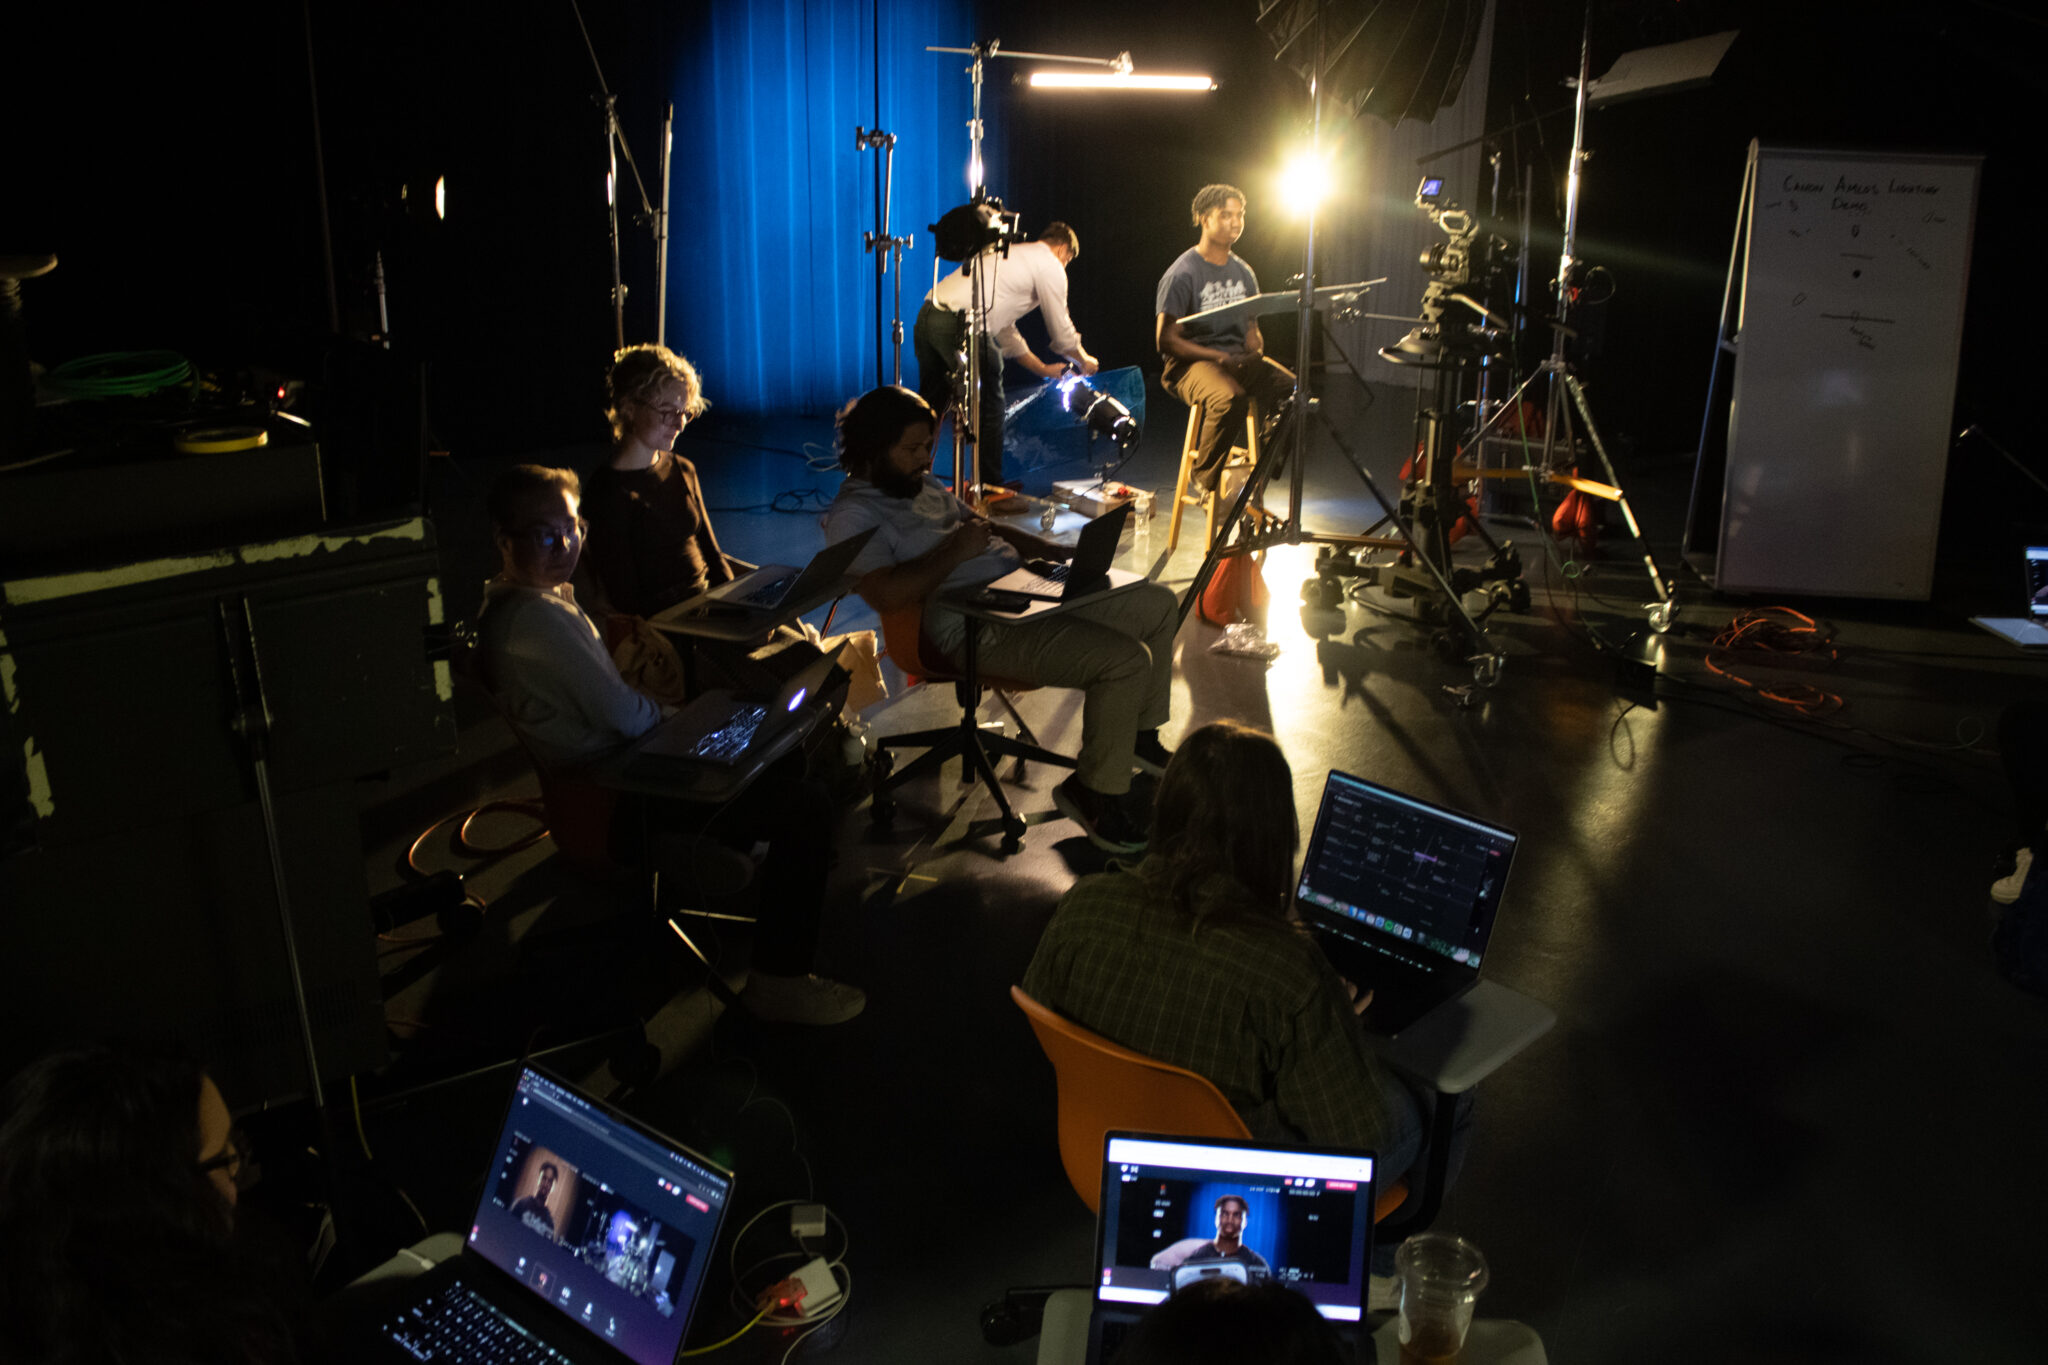 students look at their laptops in a dark photo studio